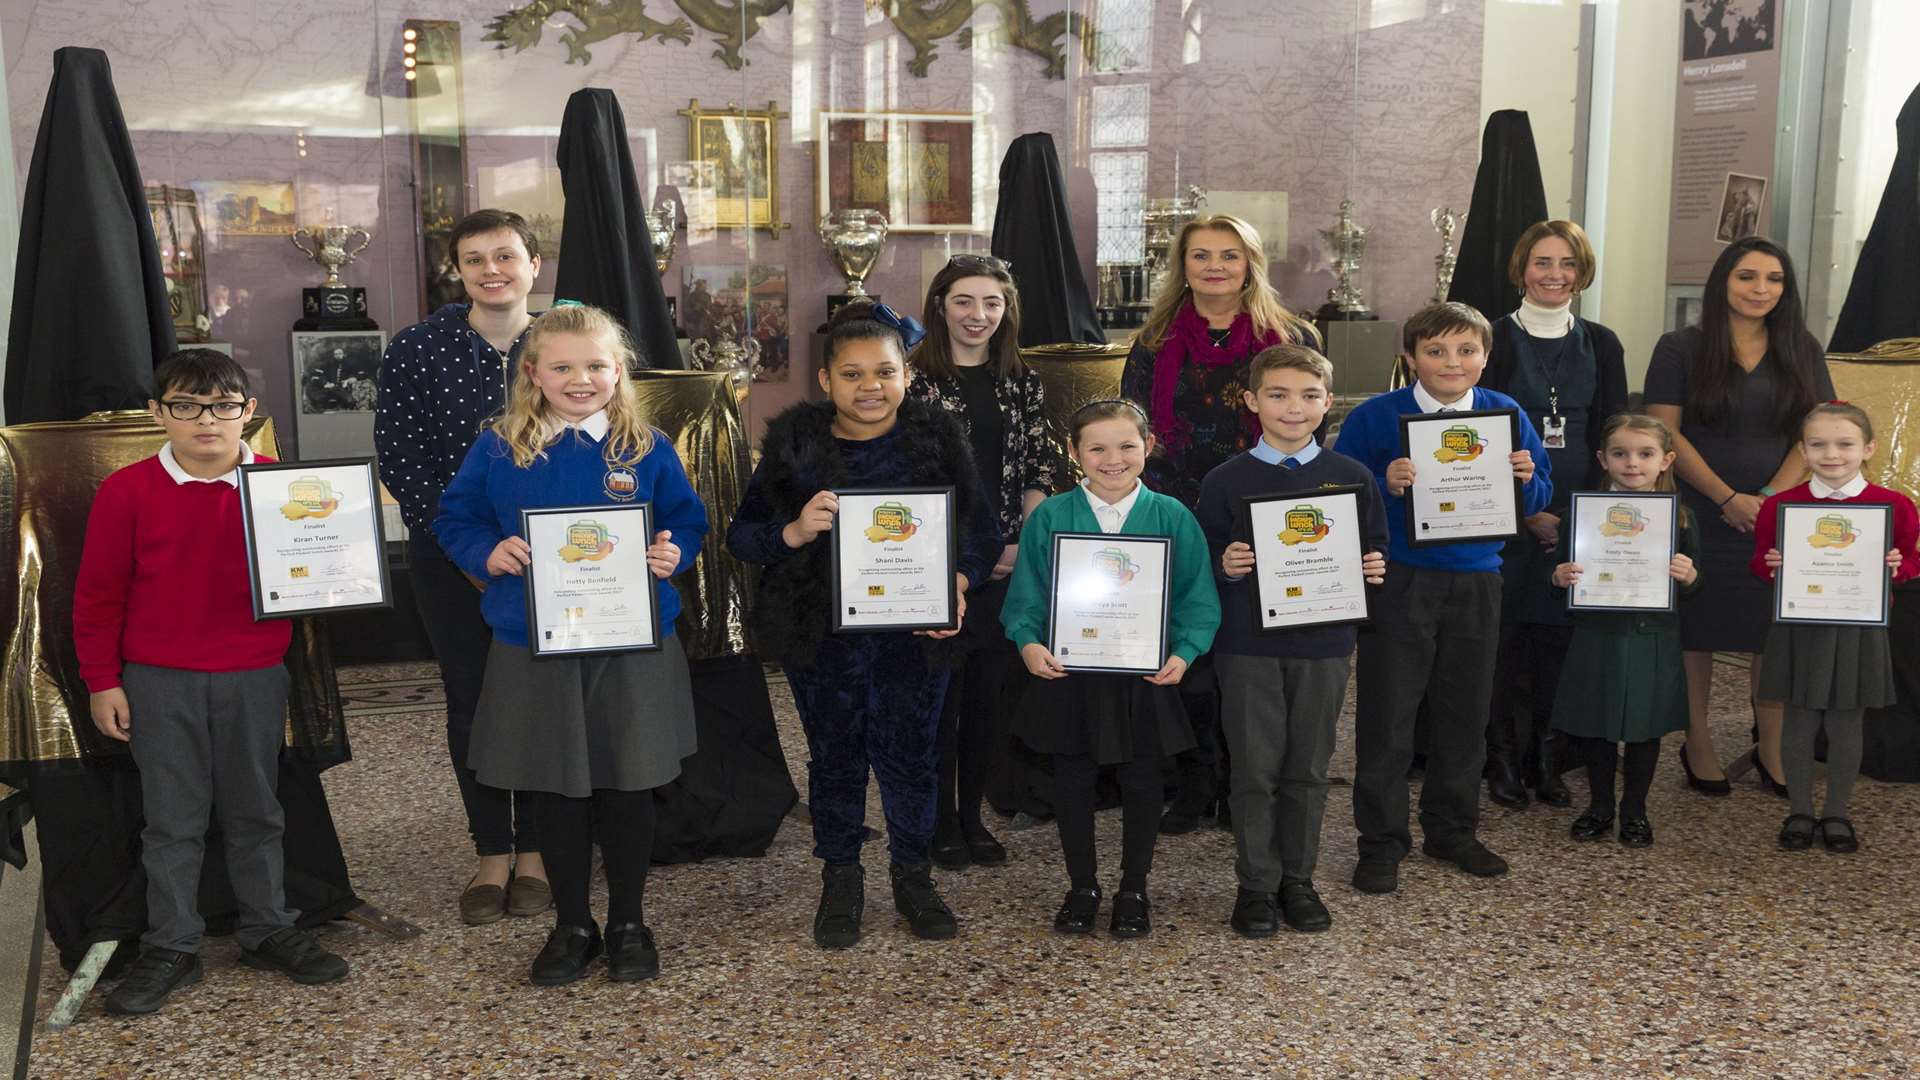 All eight finalists at the Perfect Packed Lunch Awards art and creative writing contest.